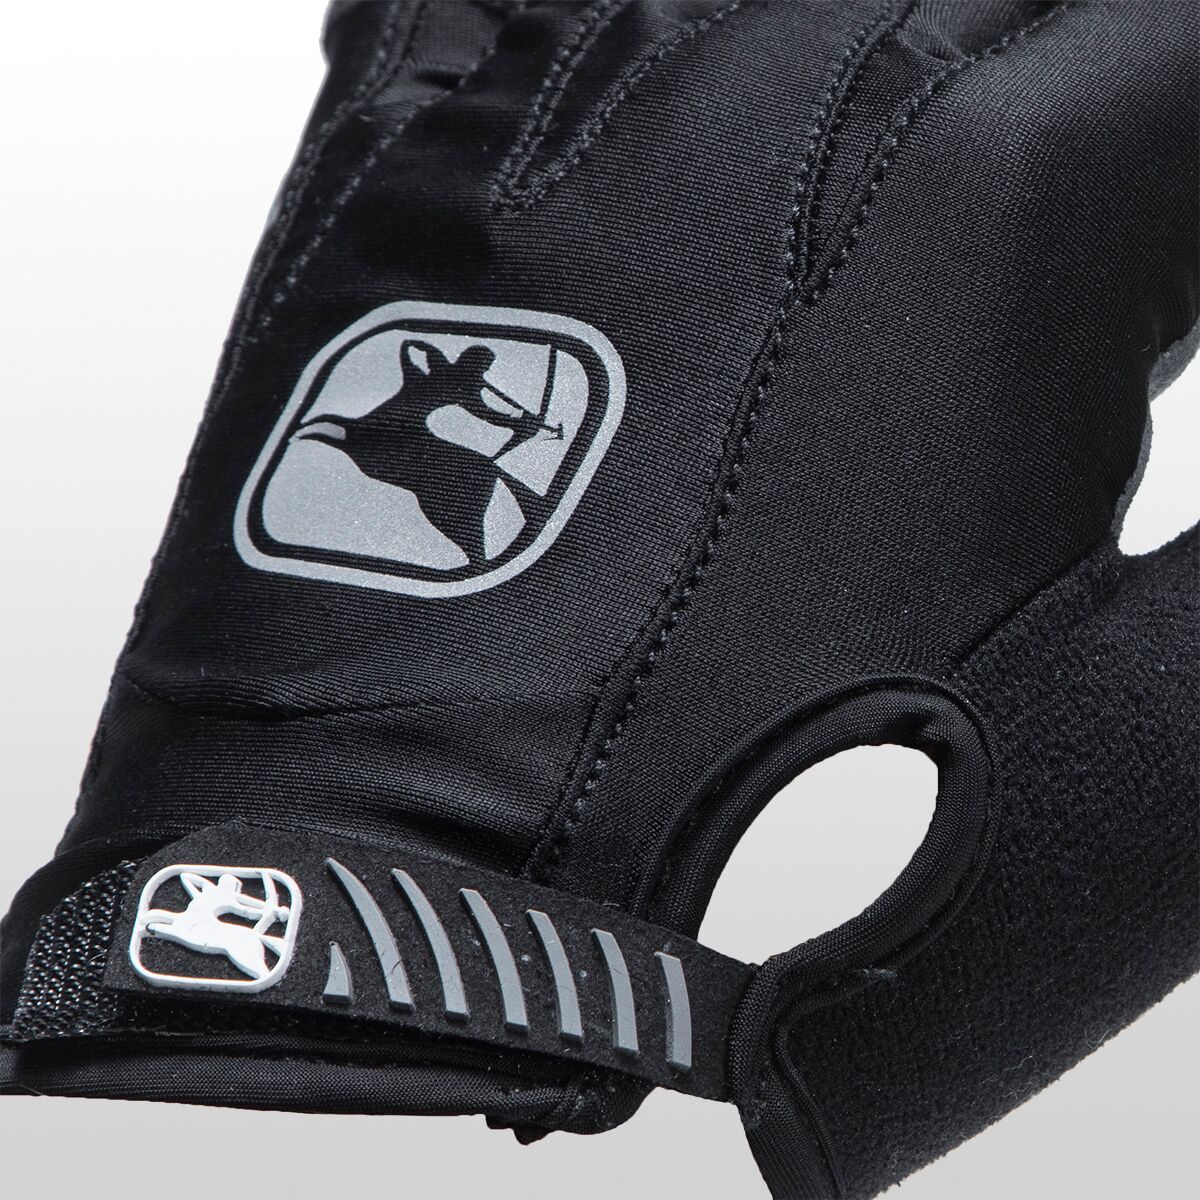 bike gloves with velcro closure style